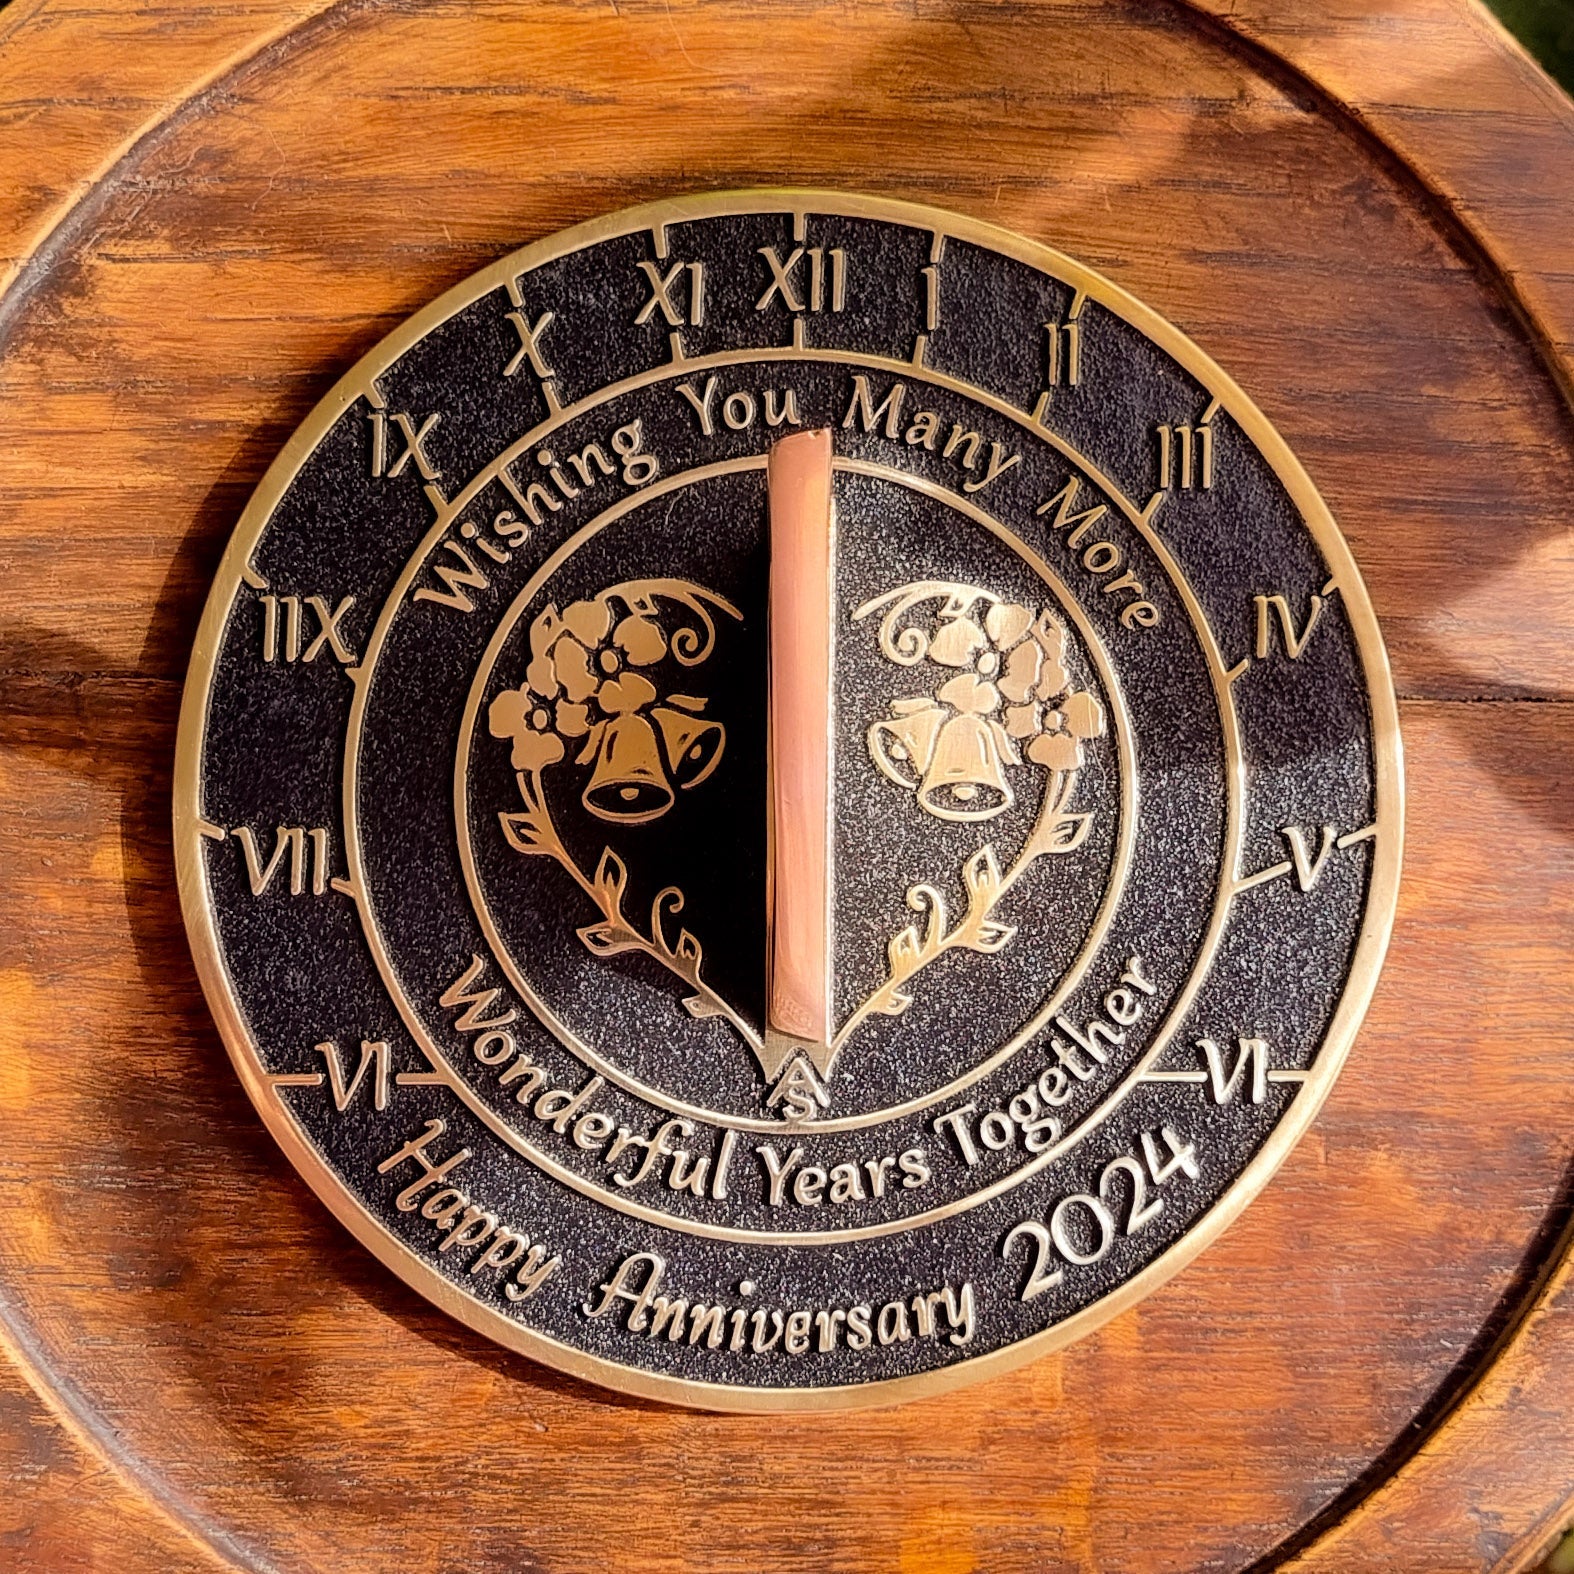 Anniversary Sundial Gift ‘Wonderful Years Together’ - The Metal Foundry